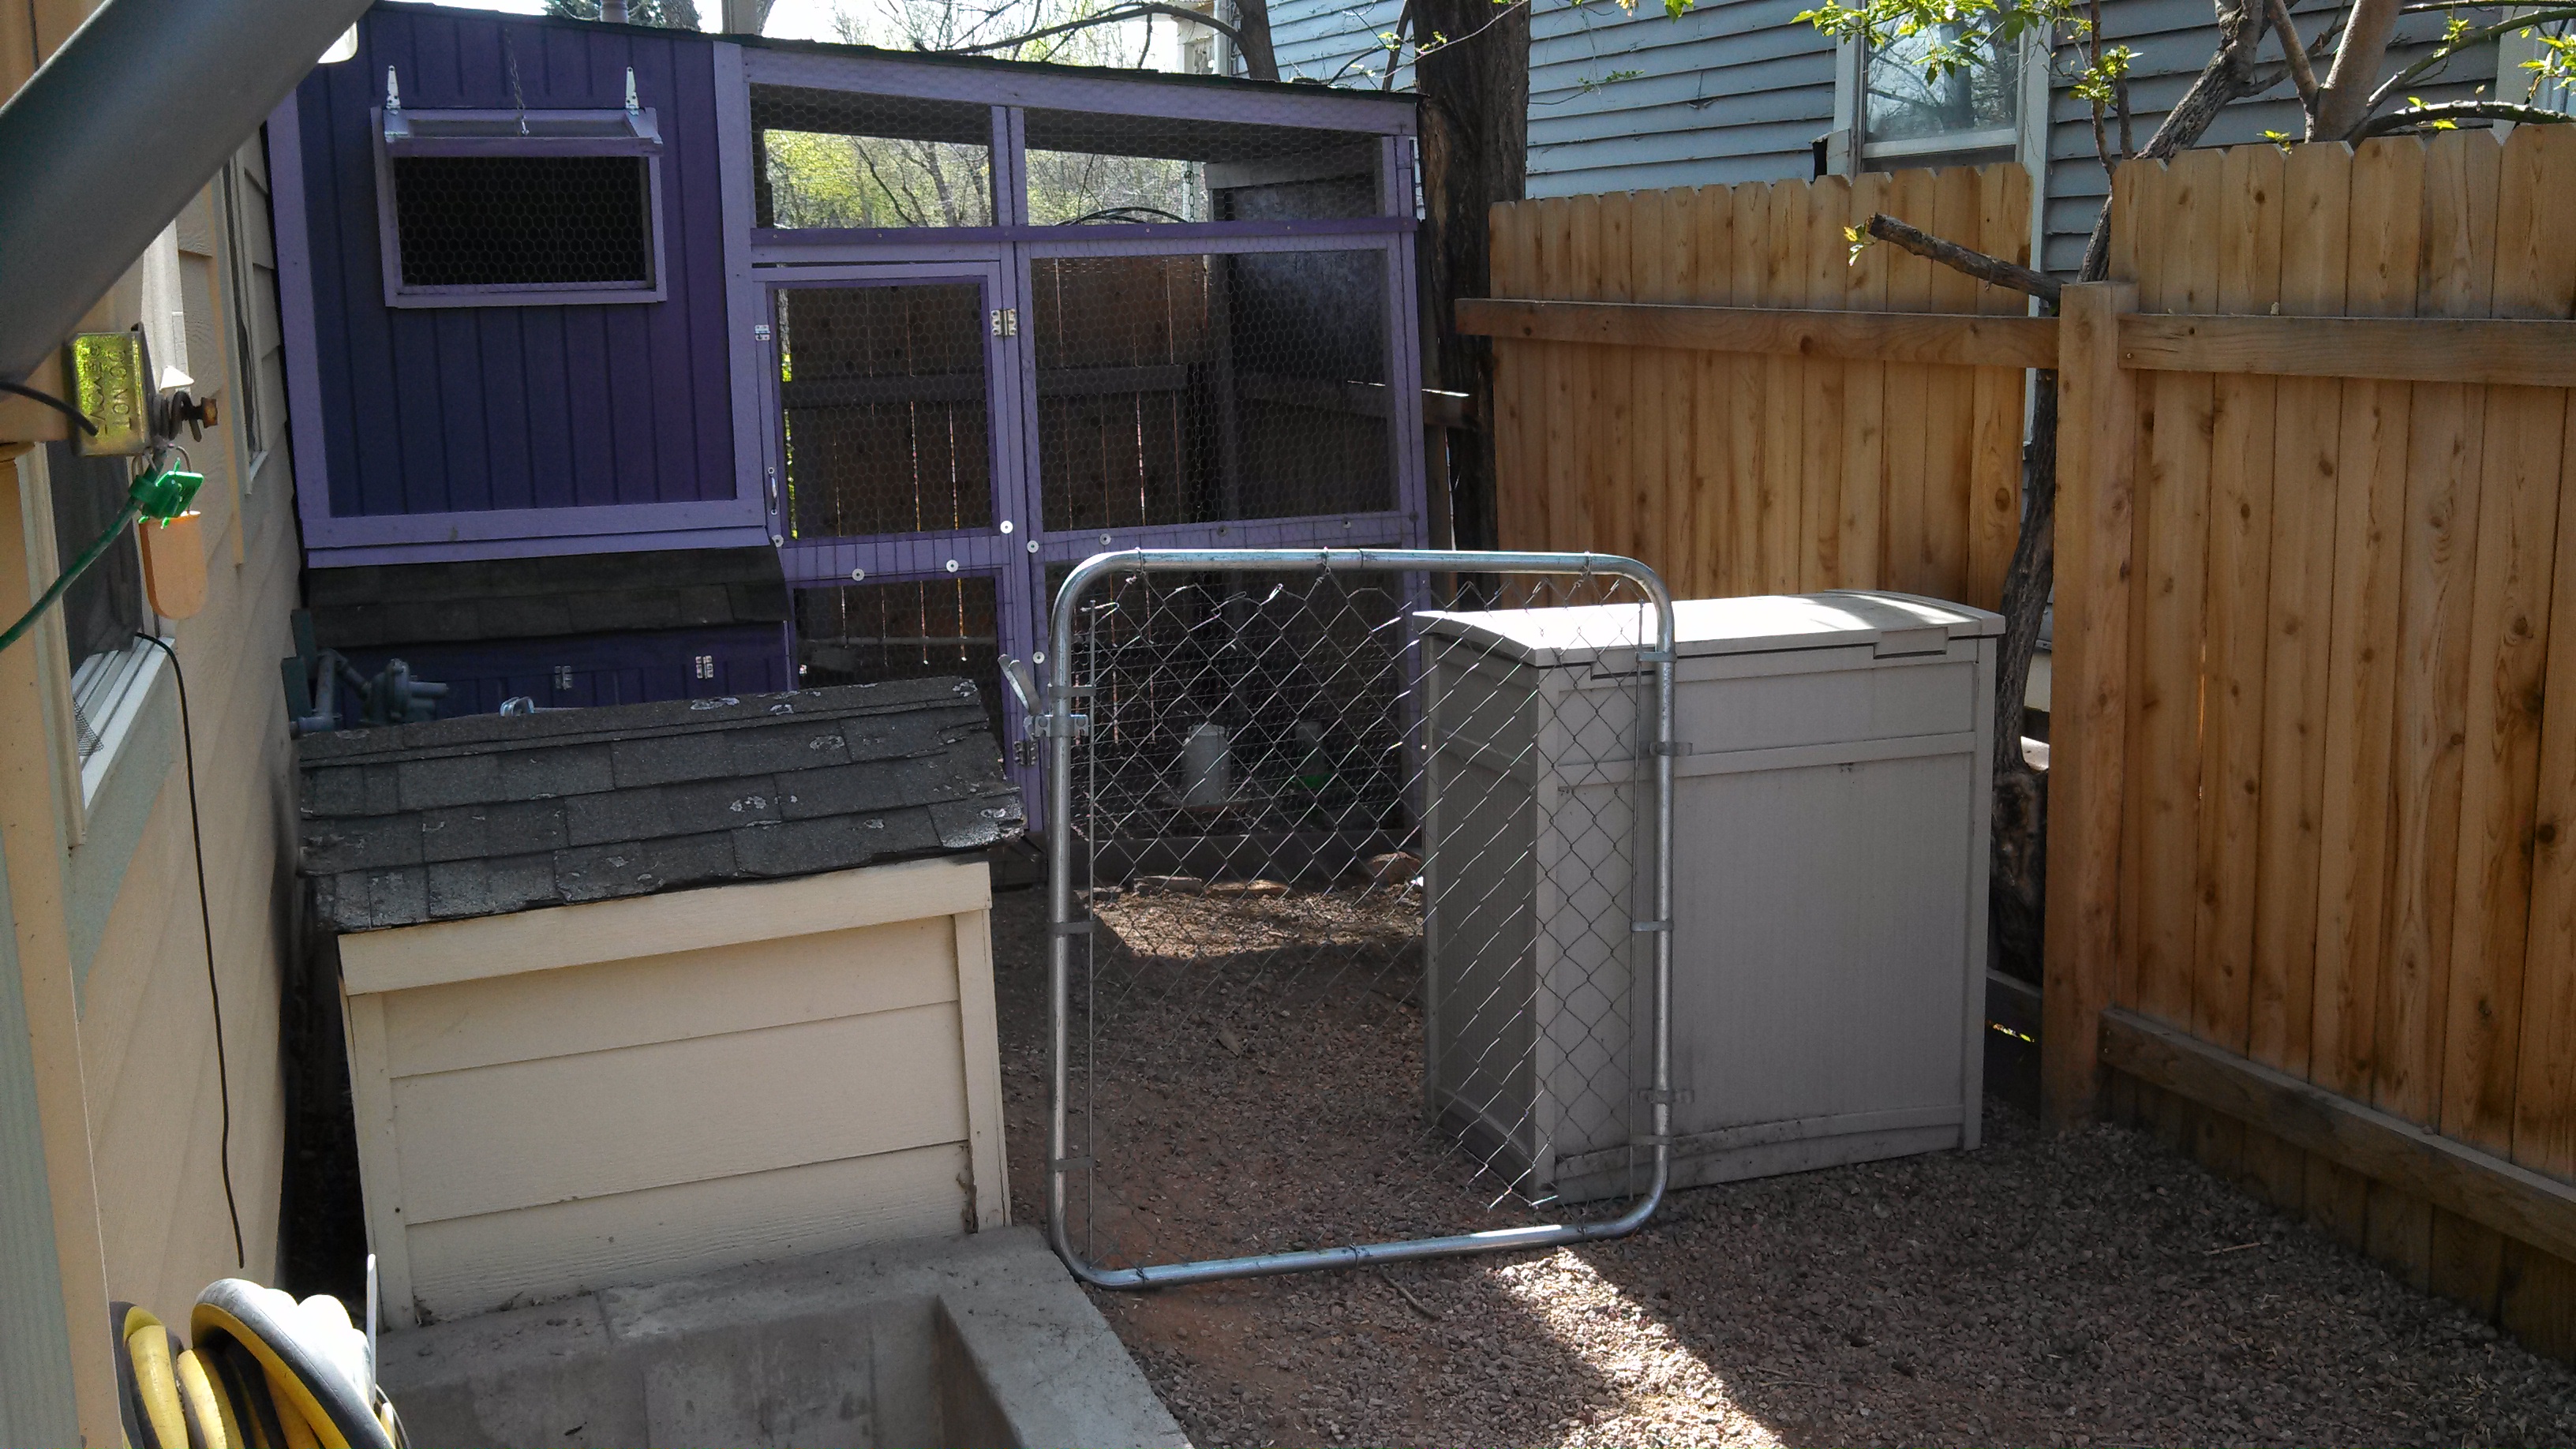 Fortifying the chicken run + Automatic chicken watering system 